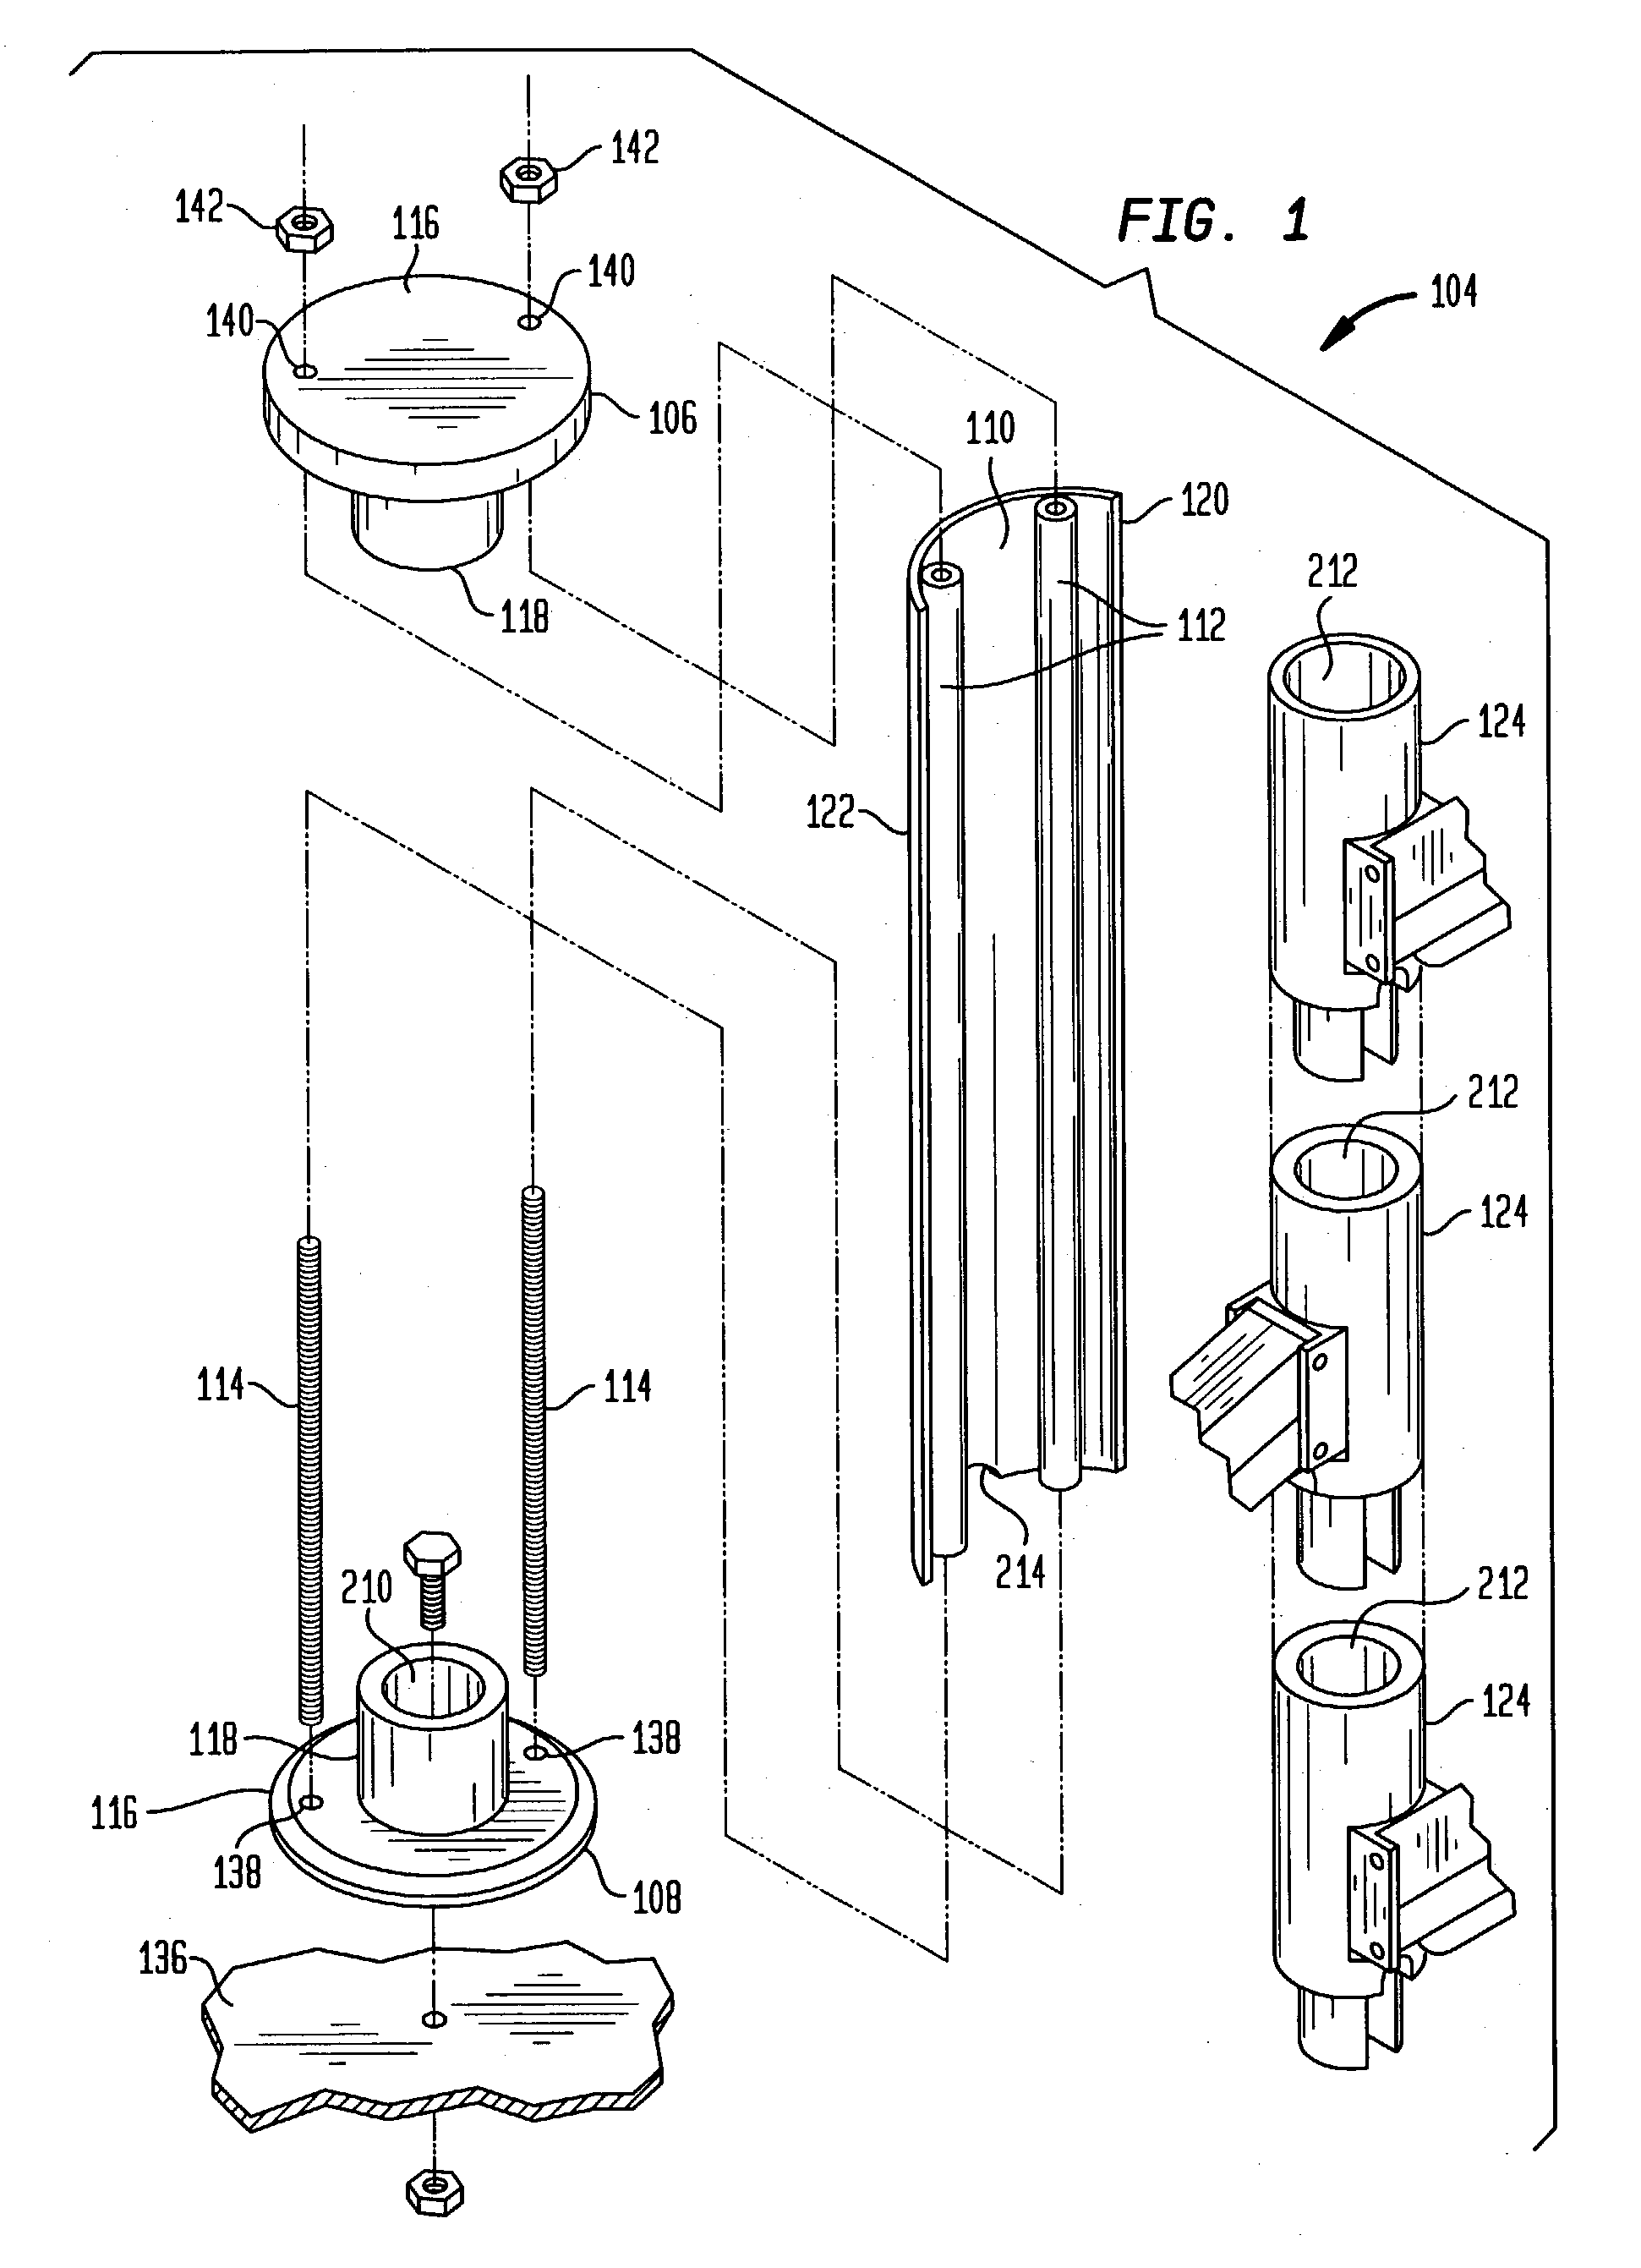 Stackable multiple support arm for electronic devices